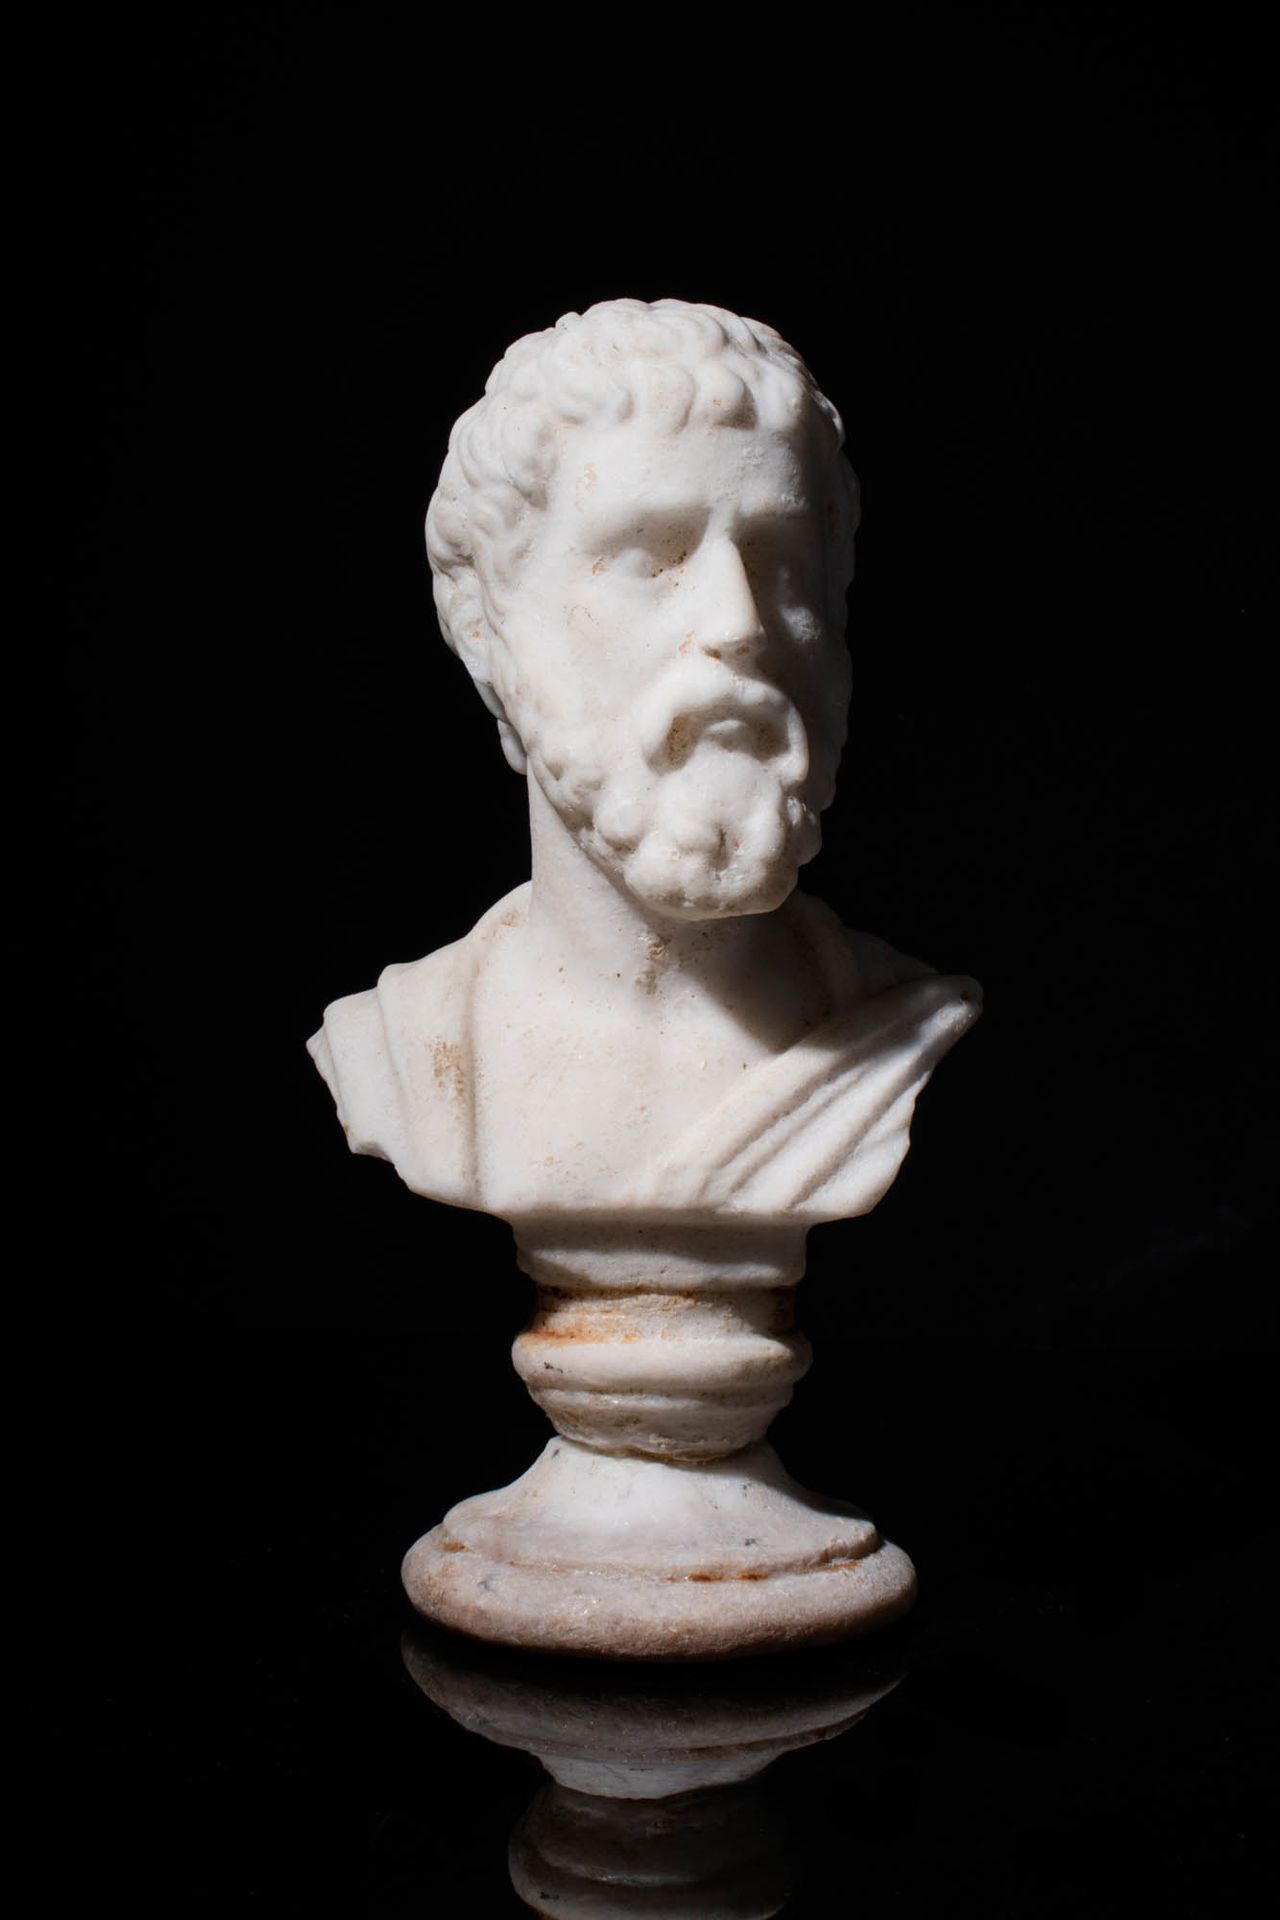 NEOCLASSICAL MARBLE BUST OF AN EMPEROR - MARCUS AURELIUS Ca. Siglo XIX d.C.
Bust&hellip;